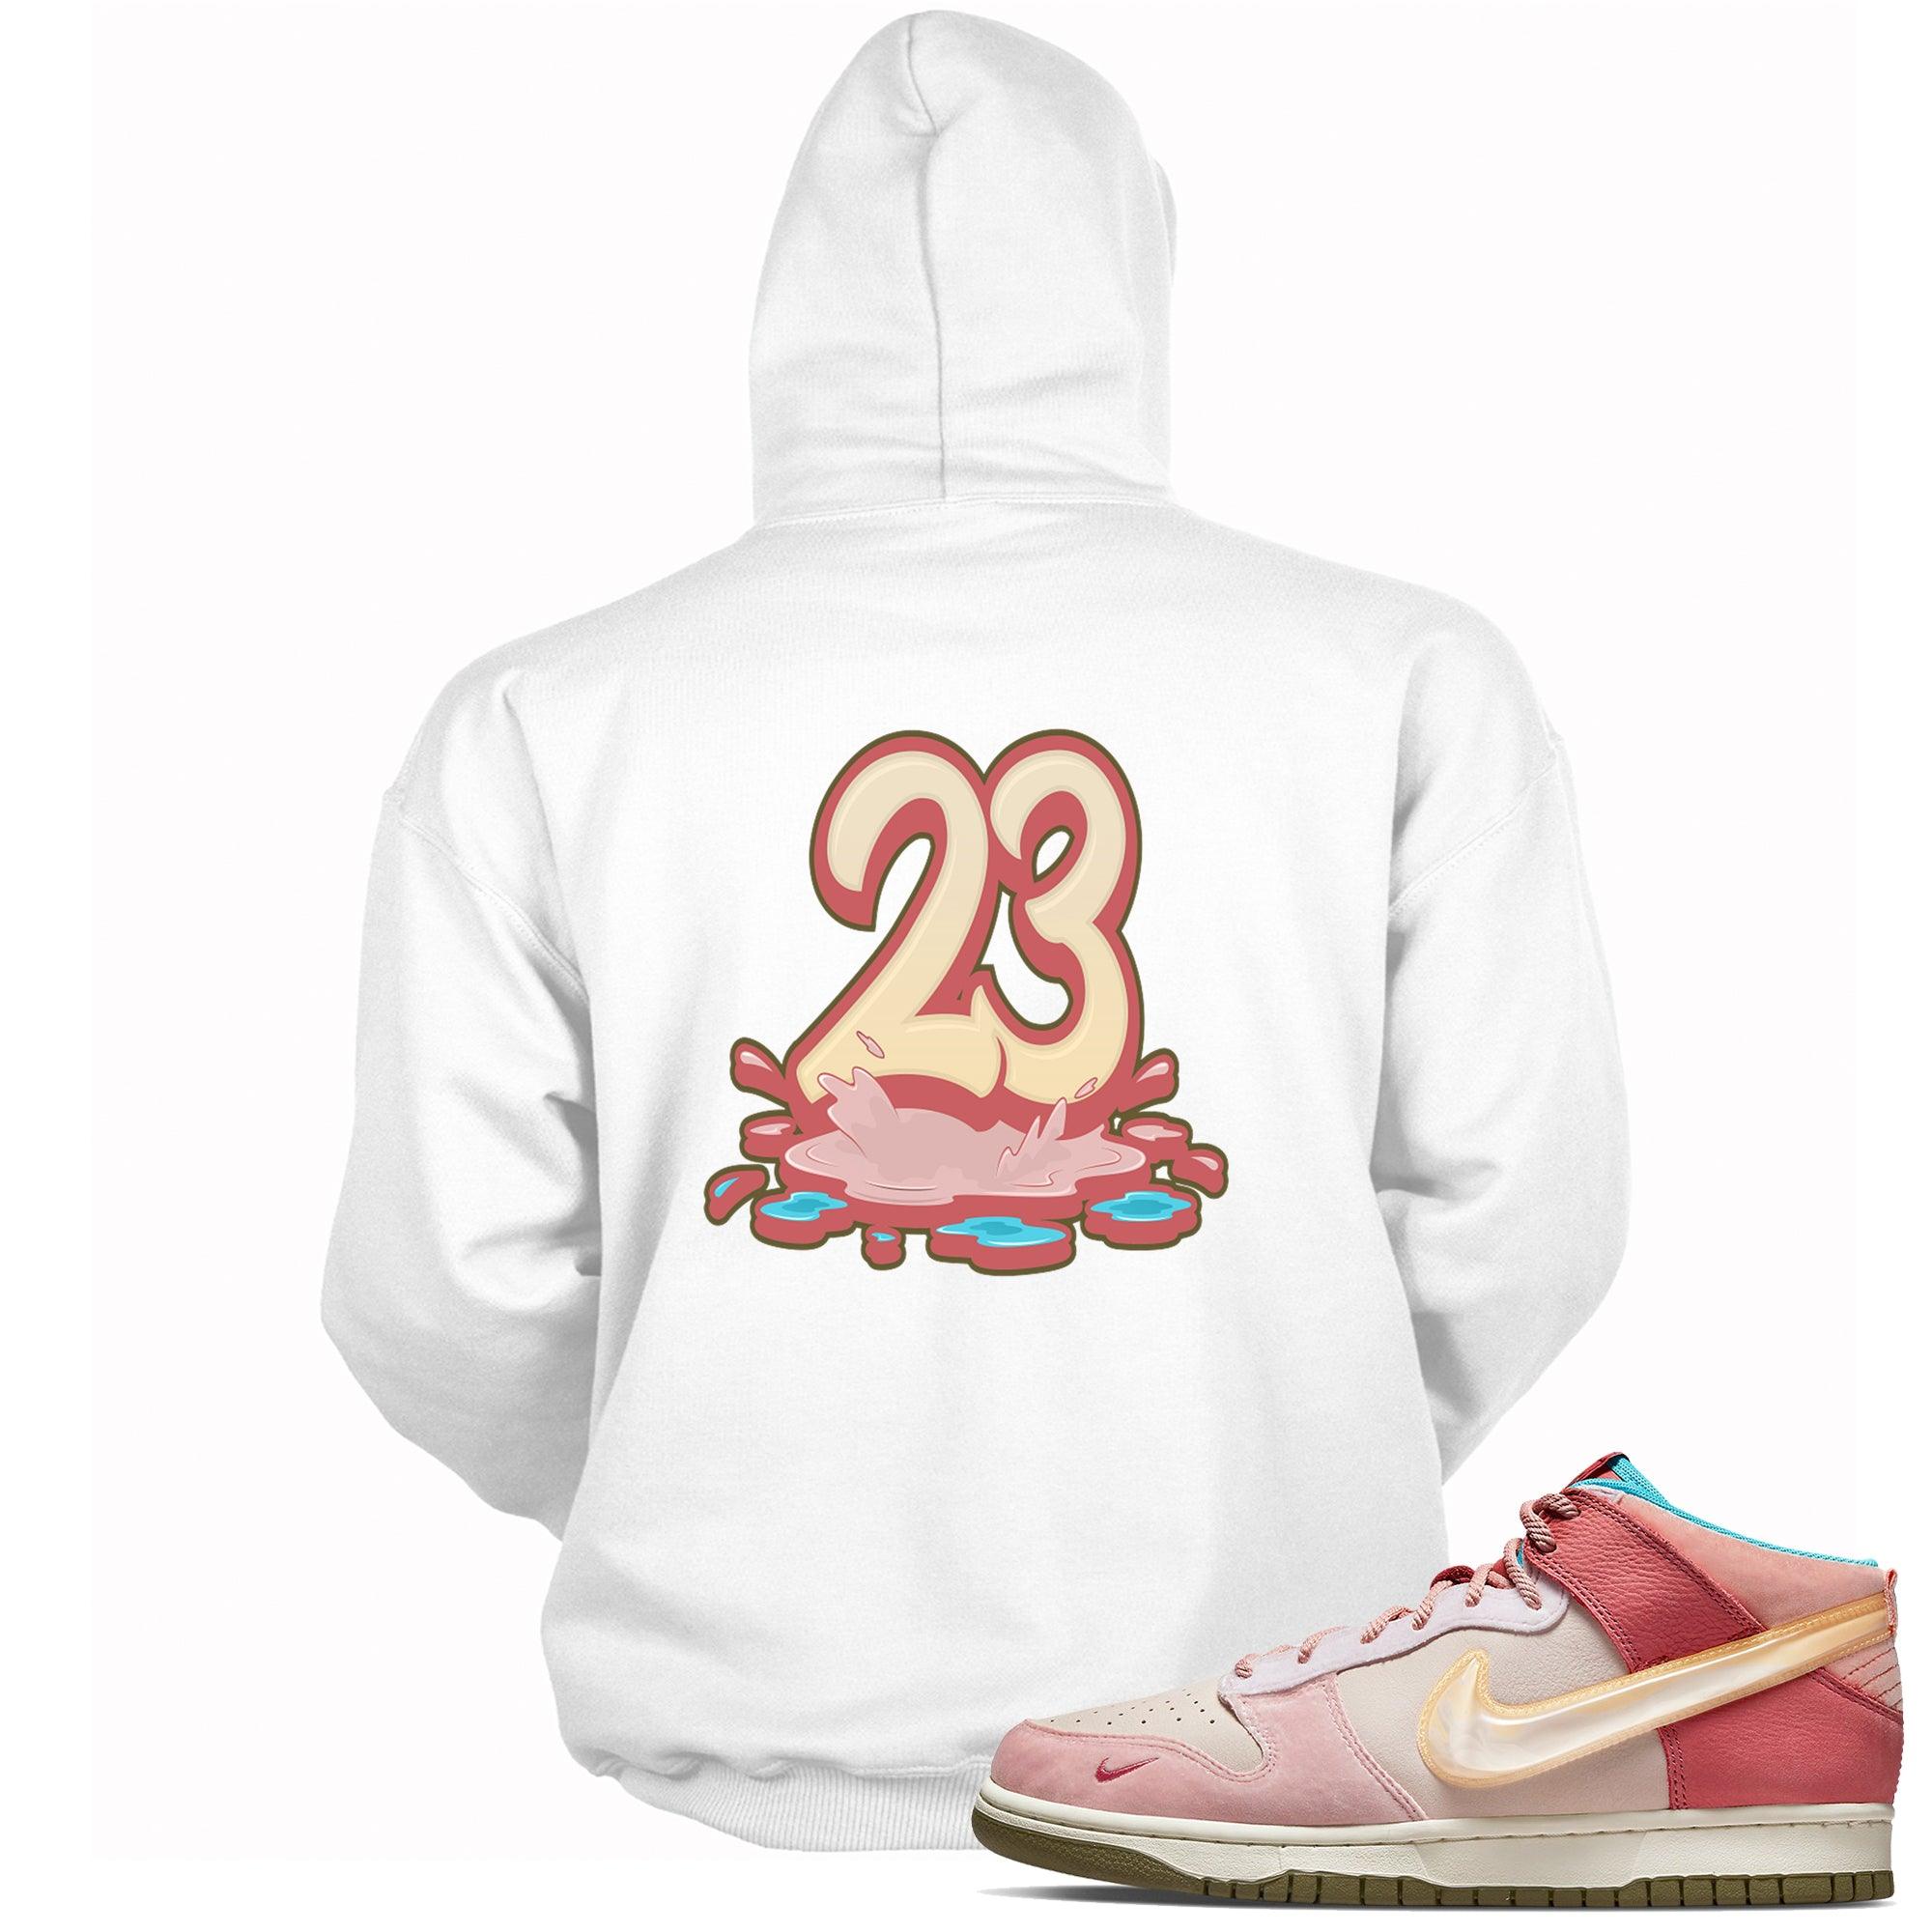 Number 23 Melting Hoodie Nike Dunks Mid Social Status Free Lunch Strawberry Milk photo